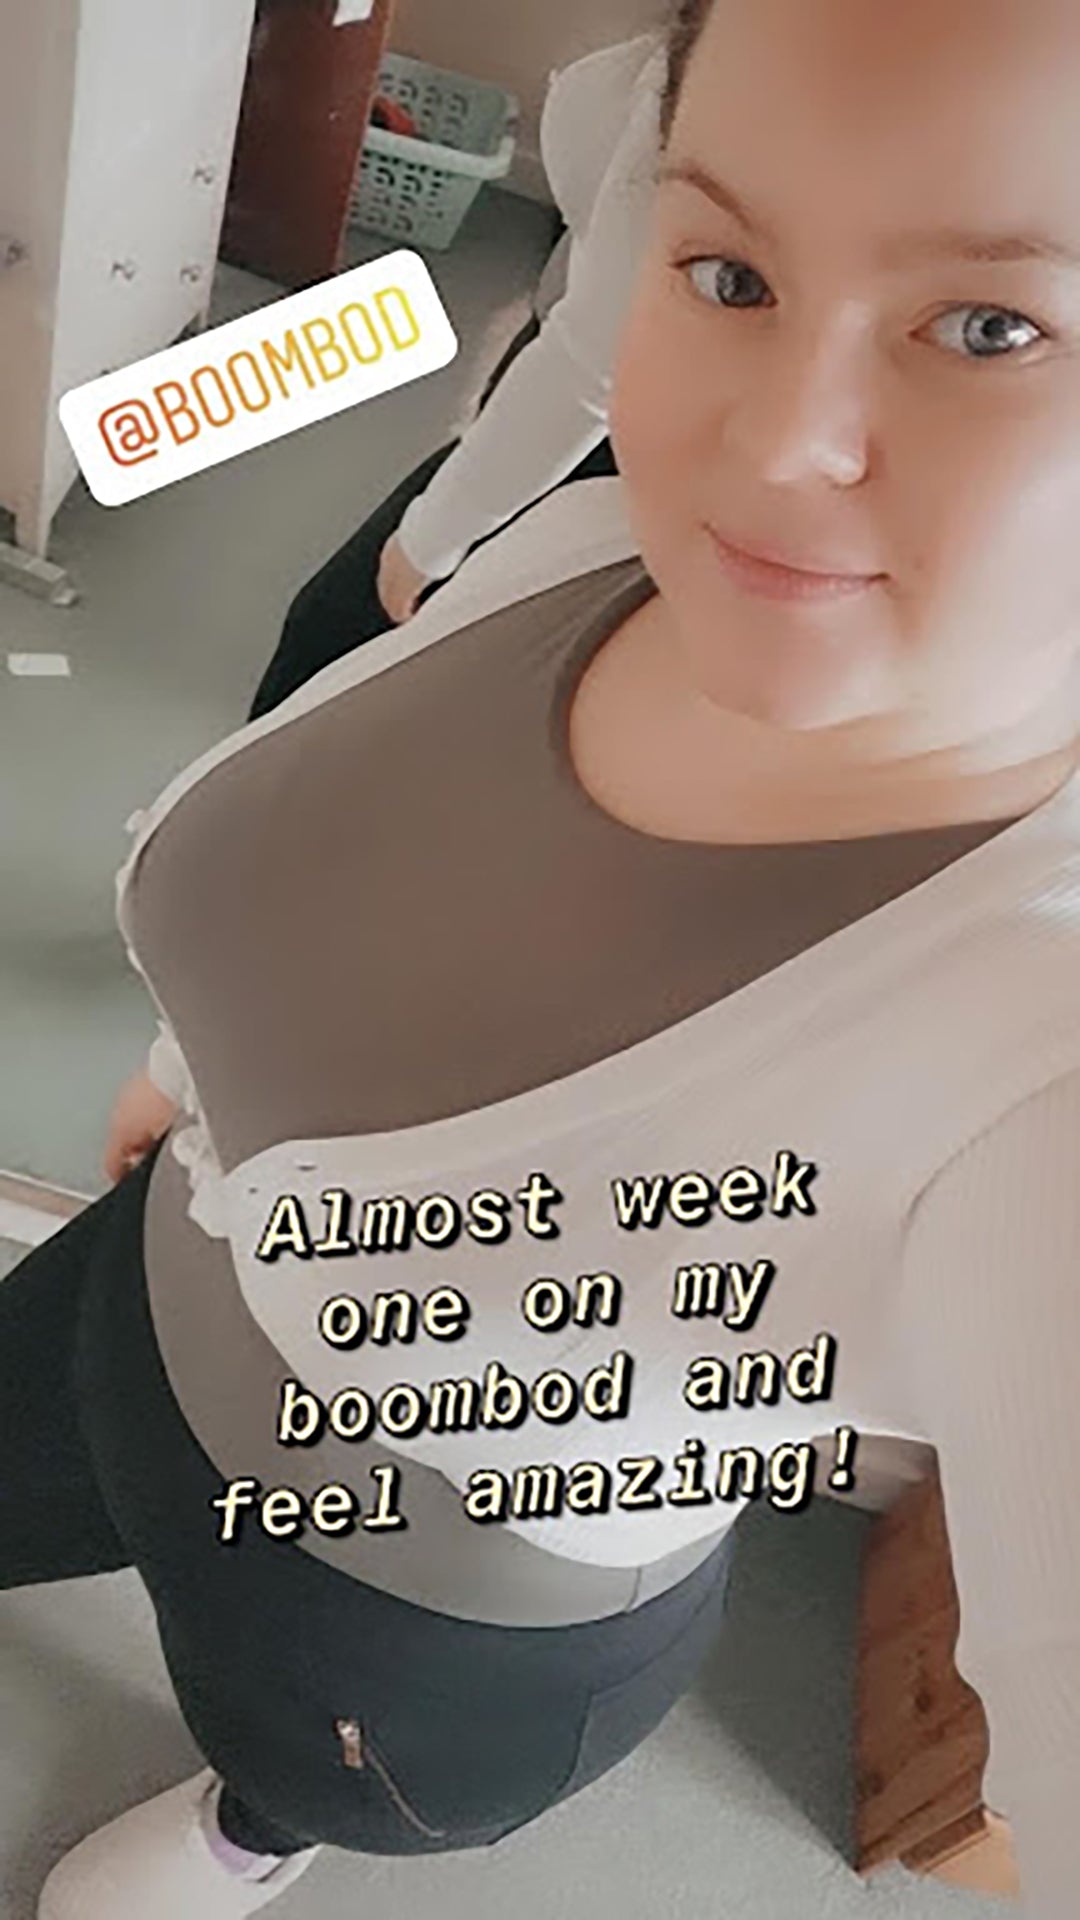 Heather Sharing Boombod Results